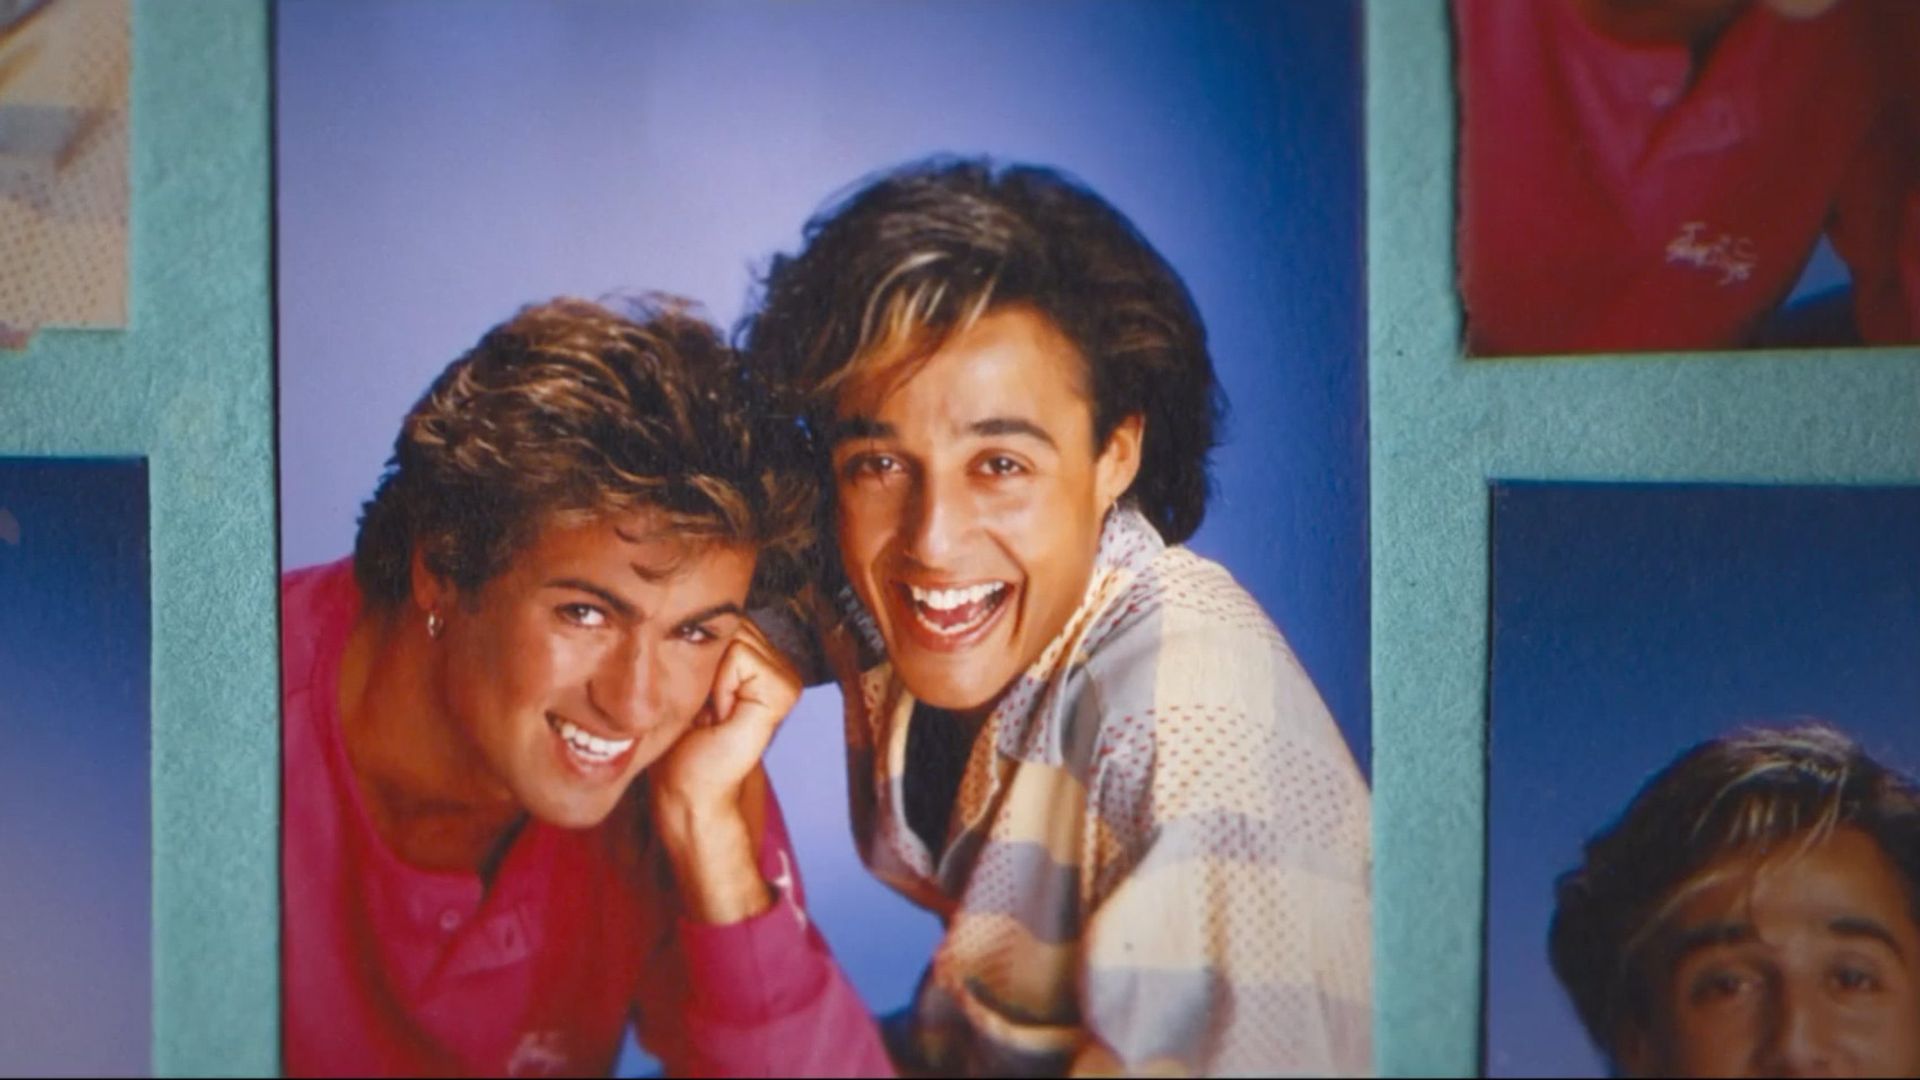 Wham!'s George Michael and Andrew Ridgeley were close friends